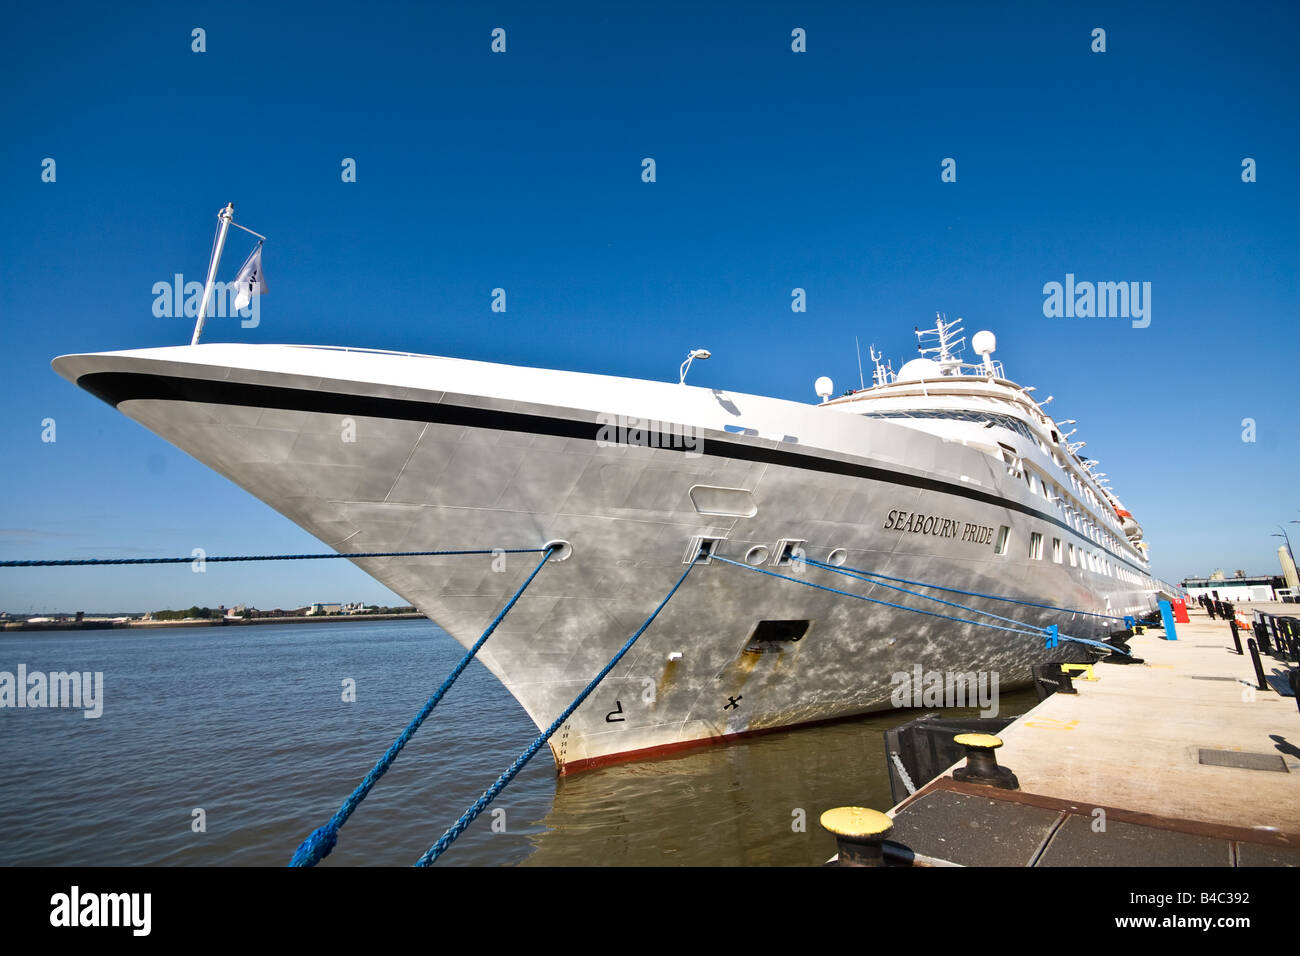 A ship docked at the Liverpool Cruise Terminal Stock Photo